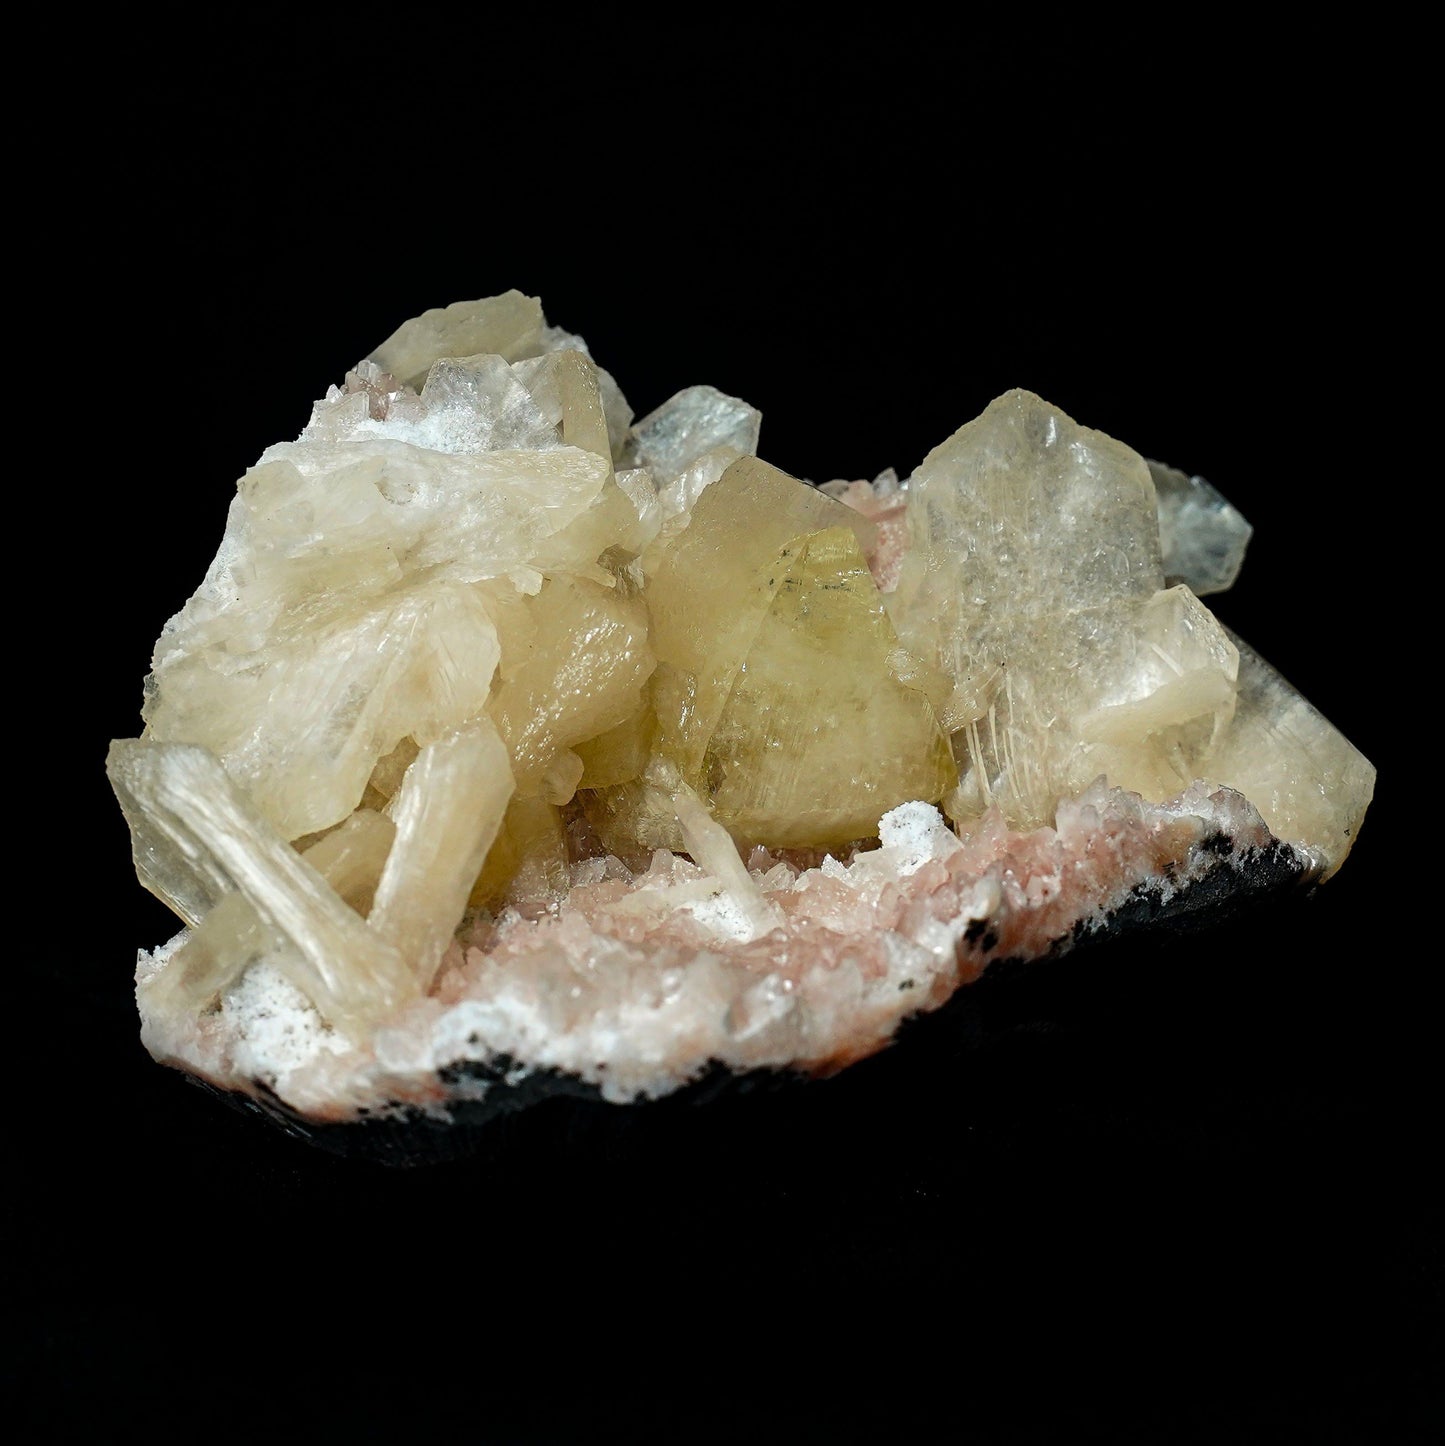 Fluorescent Powellite with Stilbite, Heulandite (Rare Find) Natural Mi…  https://www.superbminerals.us/products/fluorescent-powellite-with-stilbite-heulandite-natural-mineral-specimen-b-4972  Features: Beautiful specimen of gemmy Powellite crystal with Stilbite and Heulandite crystals from Nashik District, India. Powellite is the rarest and most desirable mineral from the Deccan Traps of India.&nbsp; It displays pleasing golden color doubly terminated Powellite crystal aesthetically growing on Heulandite